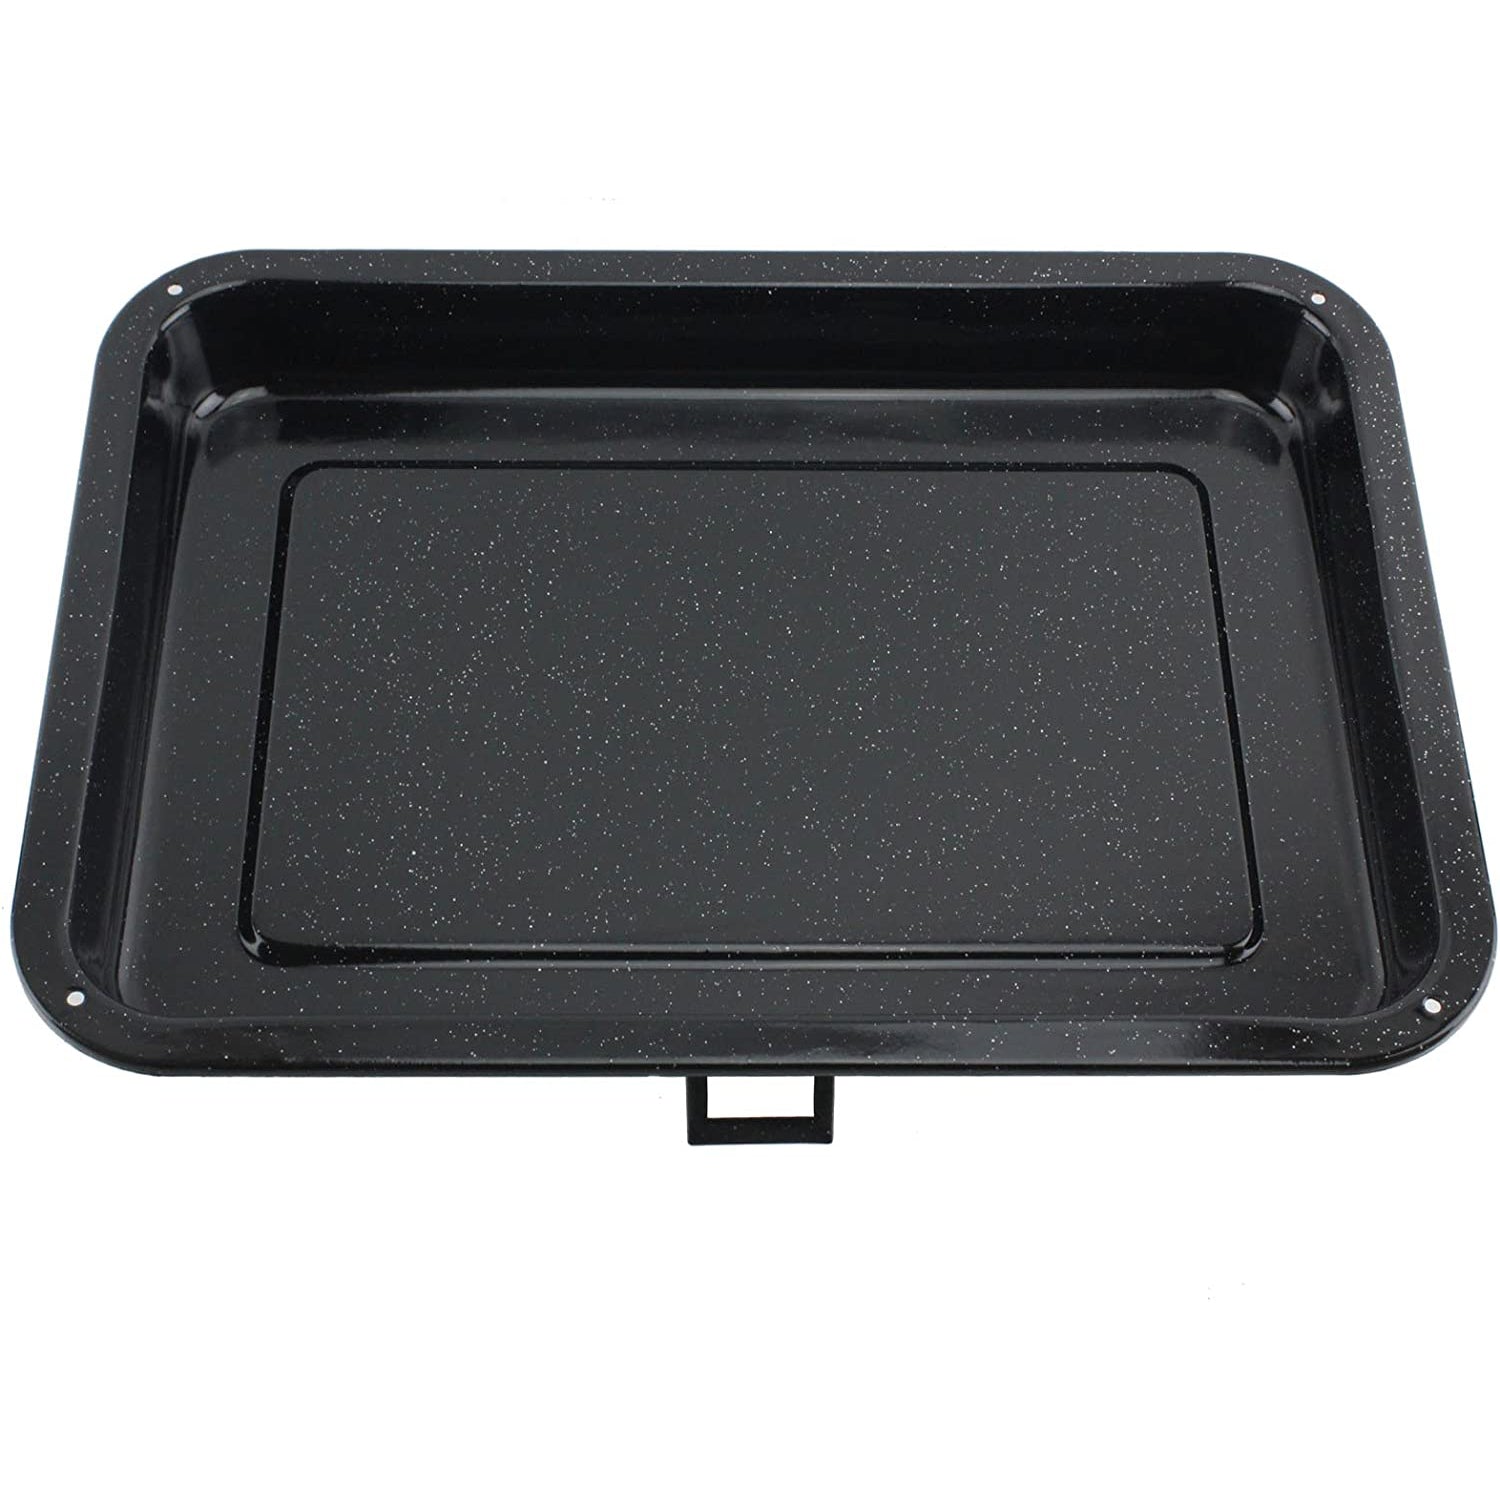 Small Grill Pan + Rack and Detachable Handle for NEFF Oven Cooker